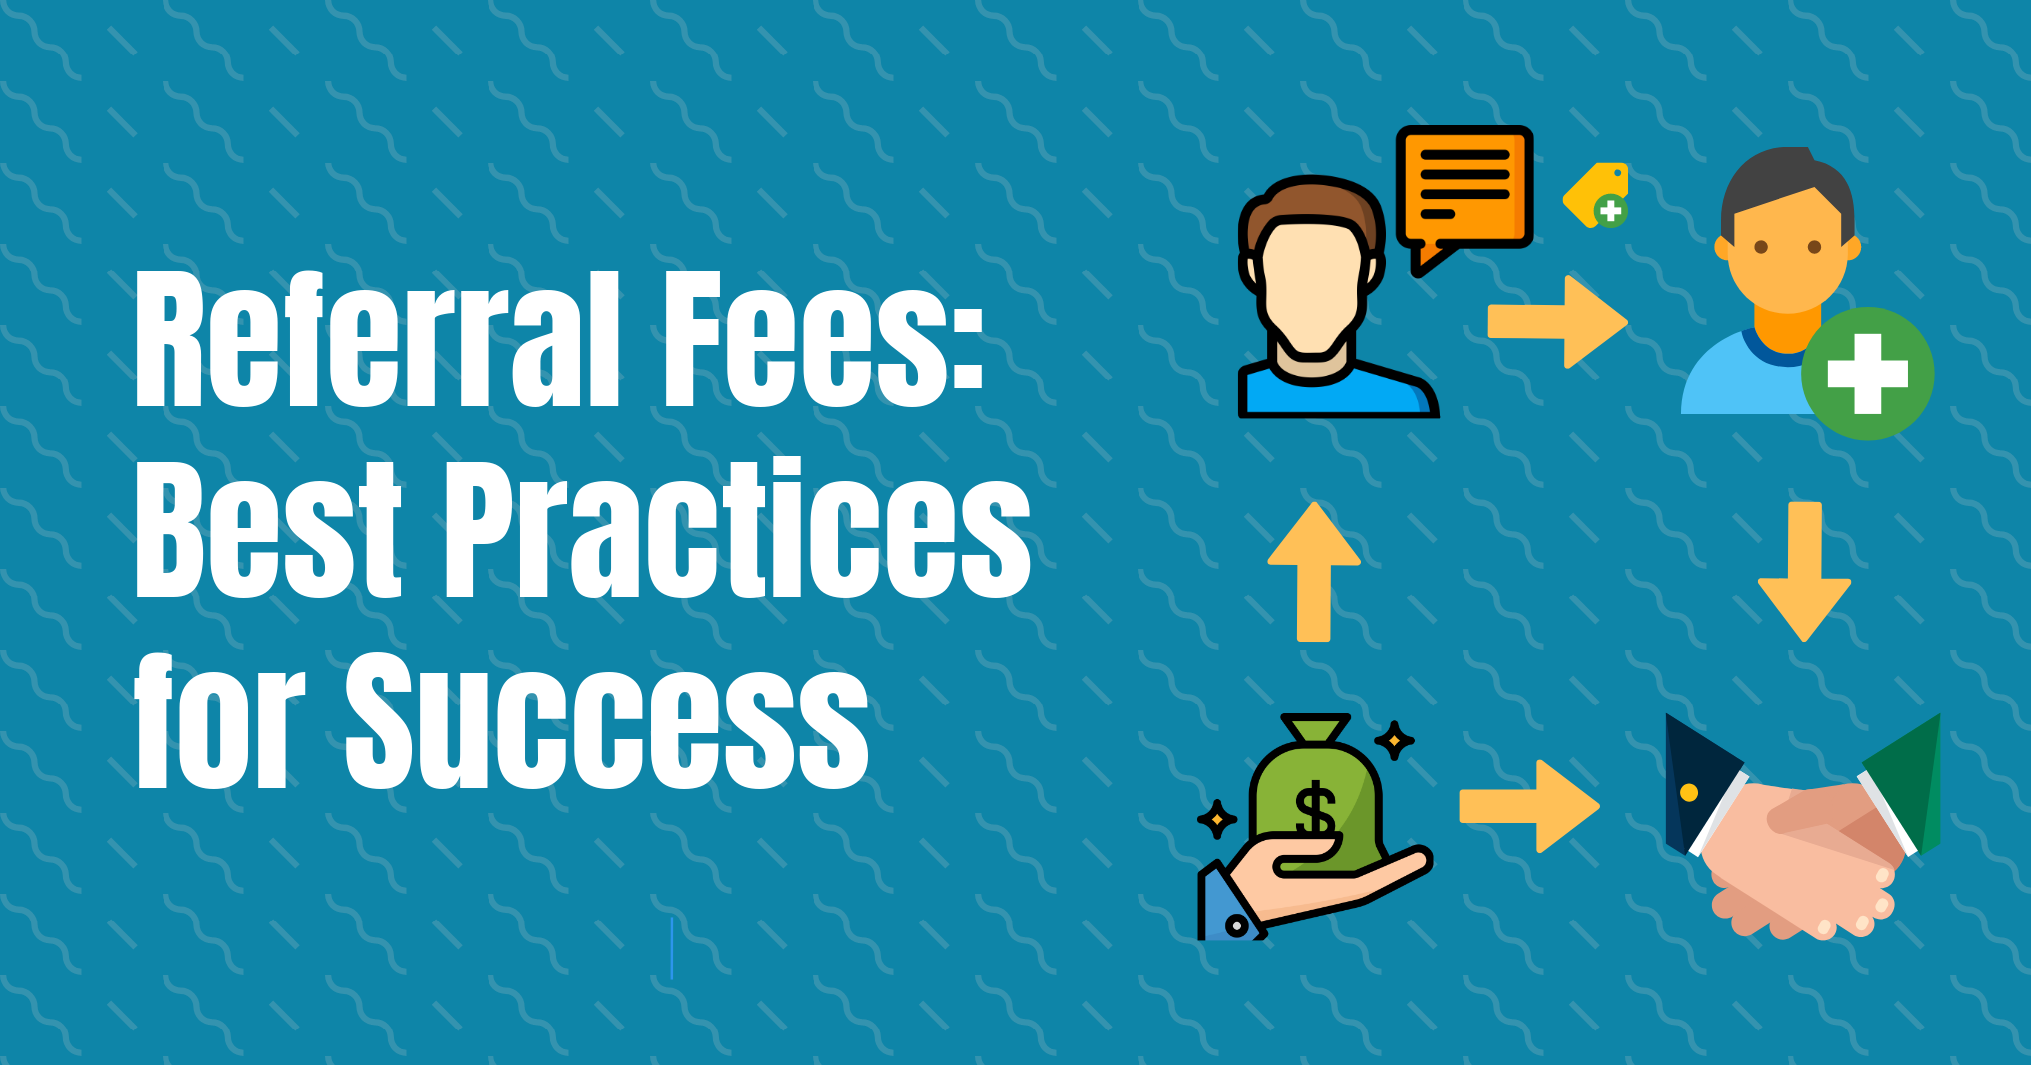 Referral Fees Best Practices For Success 4383